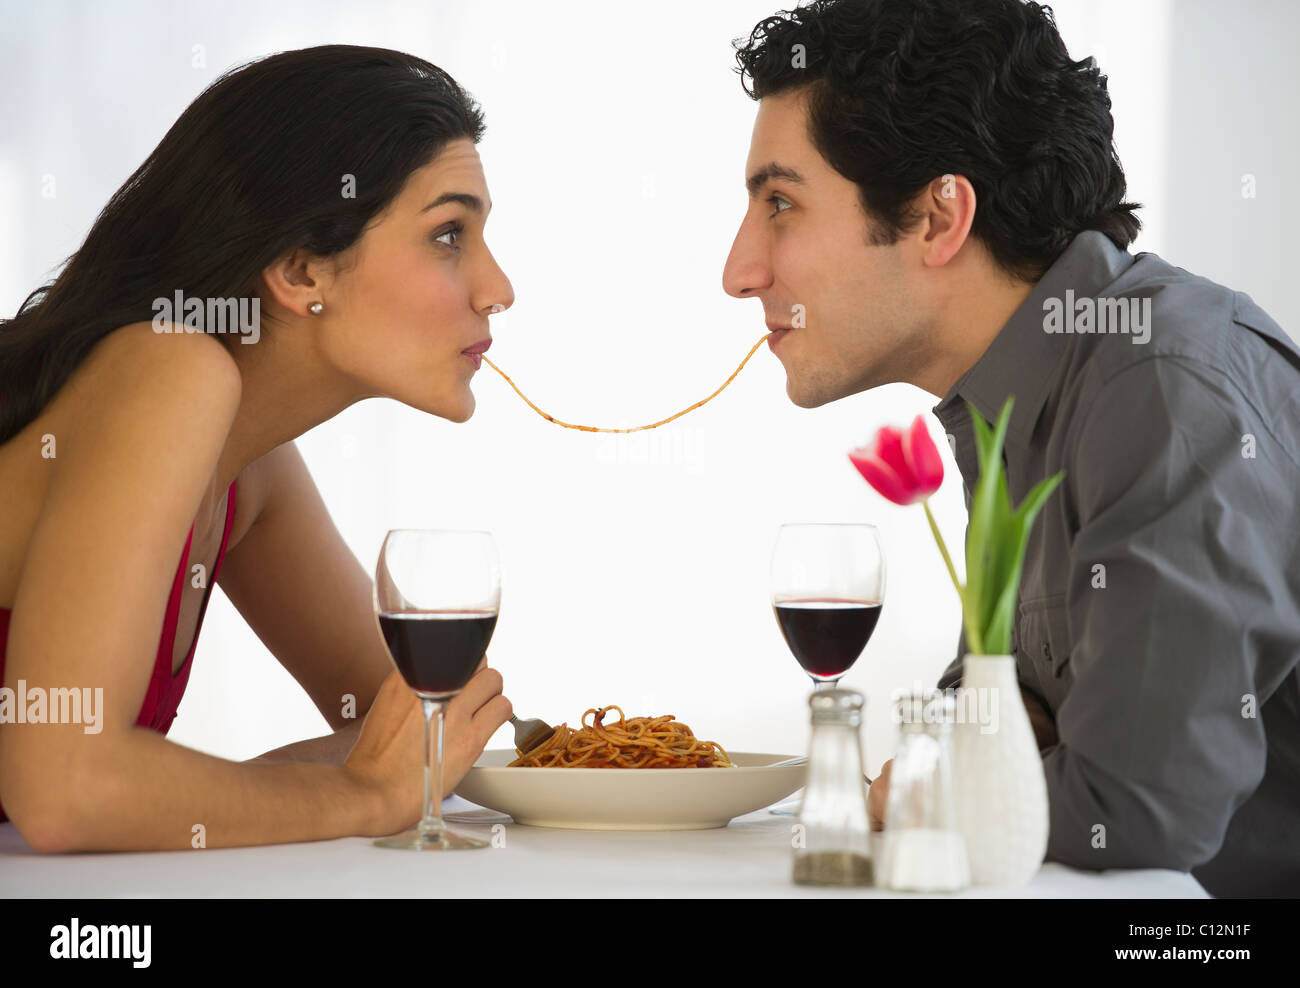 USA, New Jersey, Jersey City, Happy couple eating spaghetti together Stock Photo